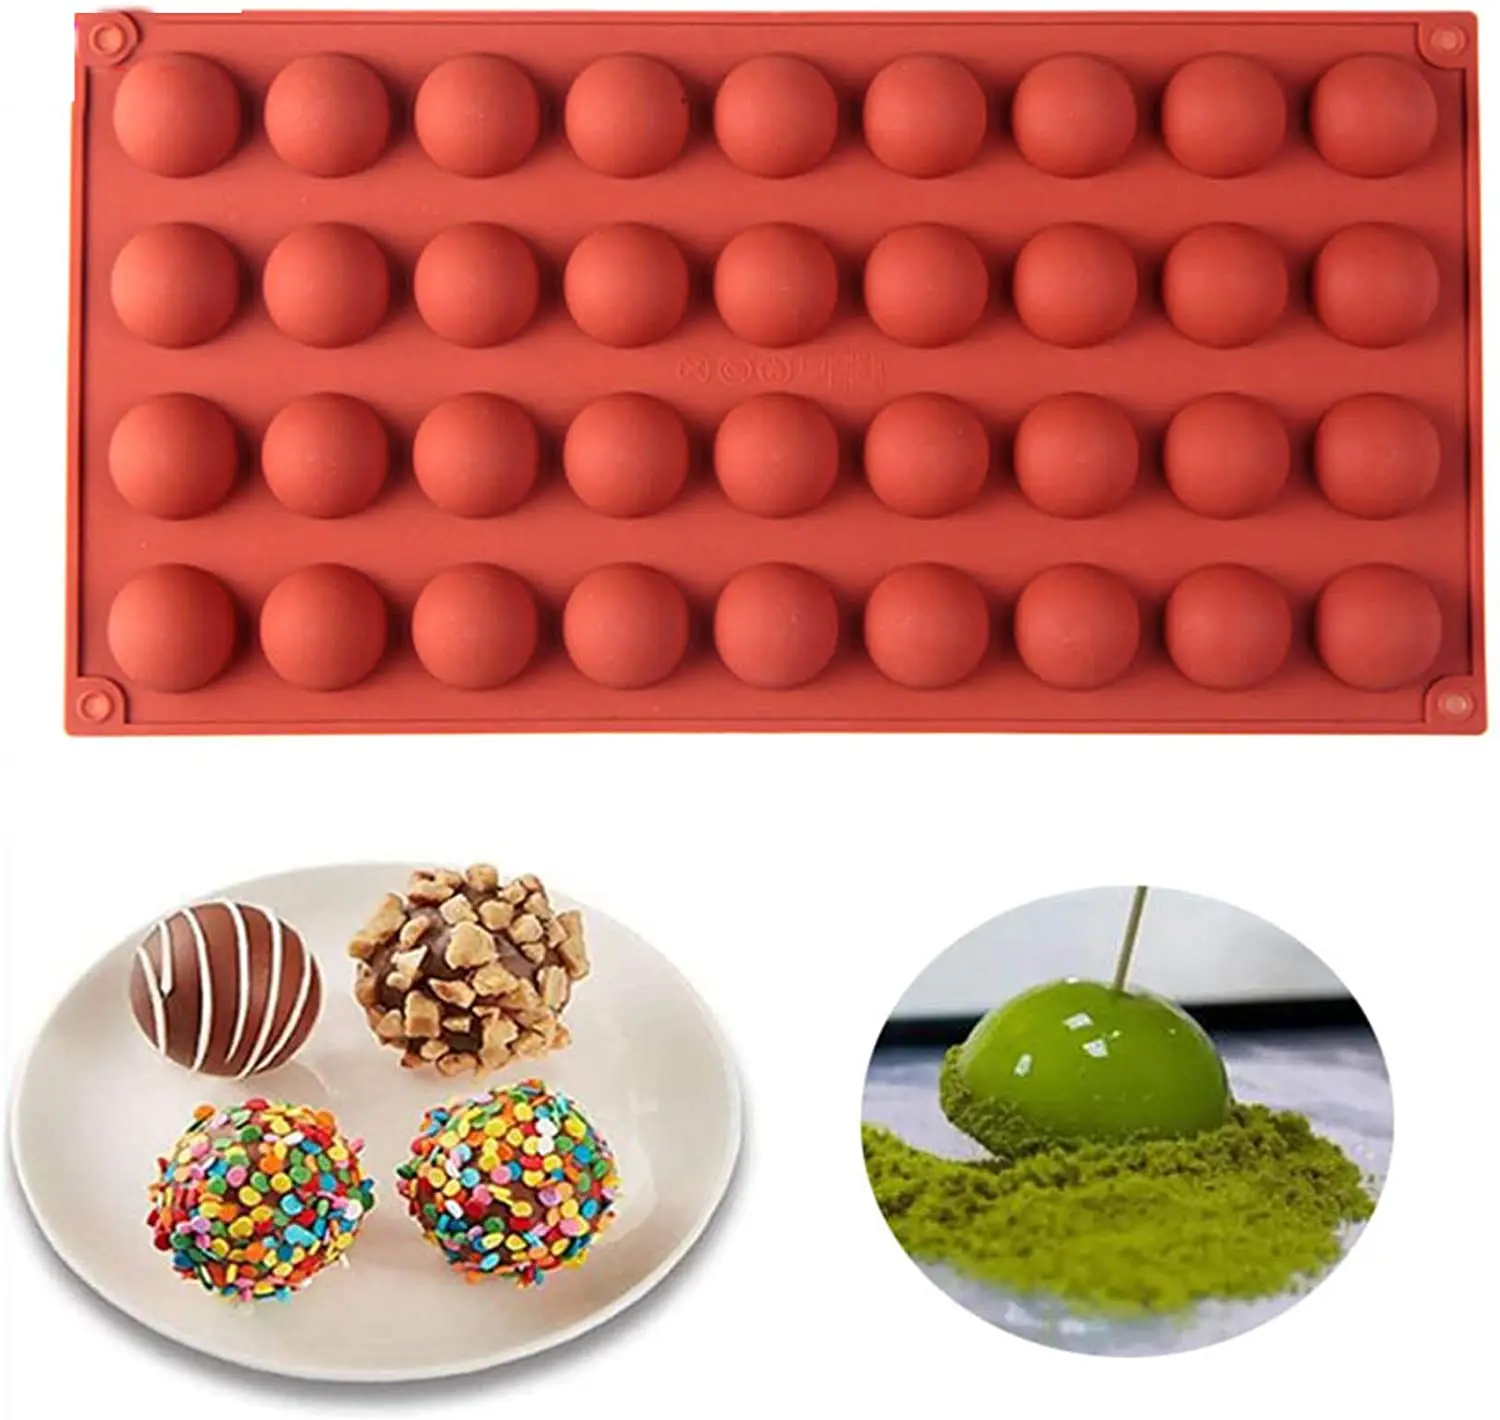 

36 Cavity Semi Sphere Silicone Mold Making Chocolate Cake Jelly Dome Mousse Trays Non-Stick Fondant Moulds Bakeware Tools